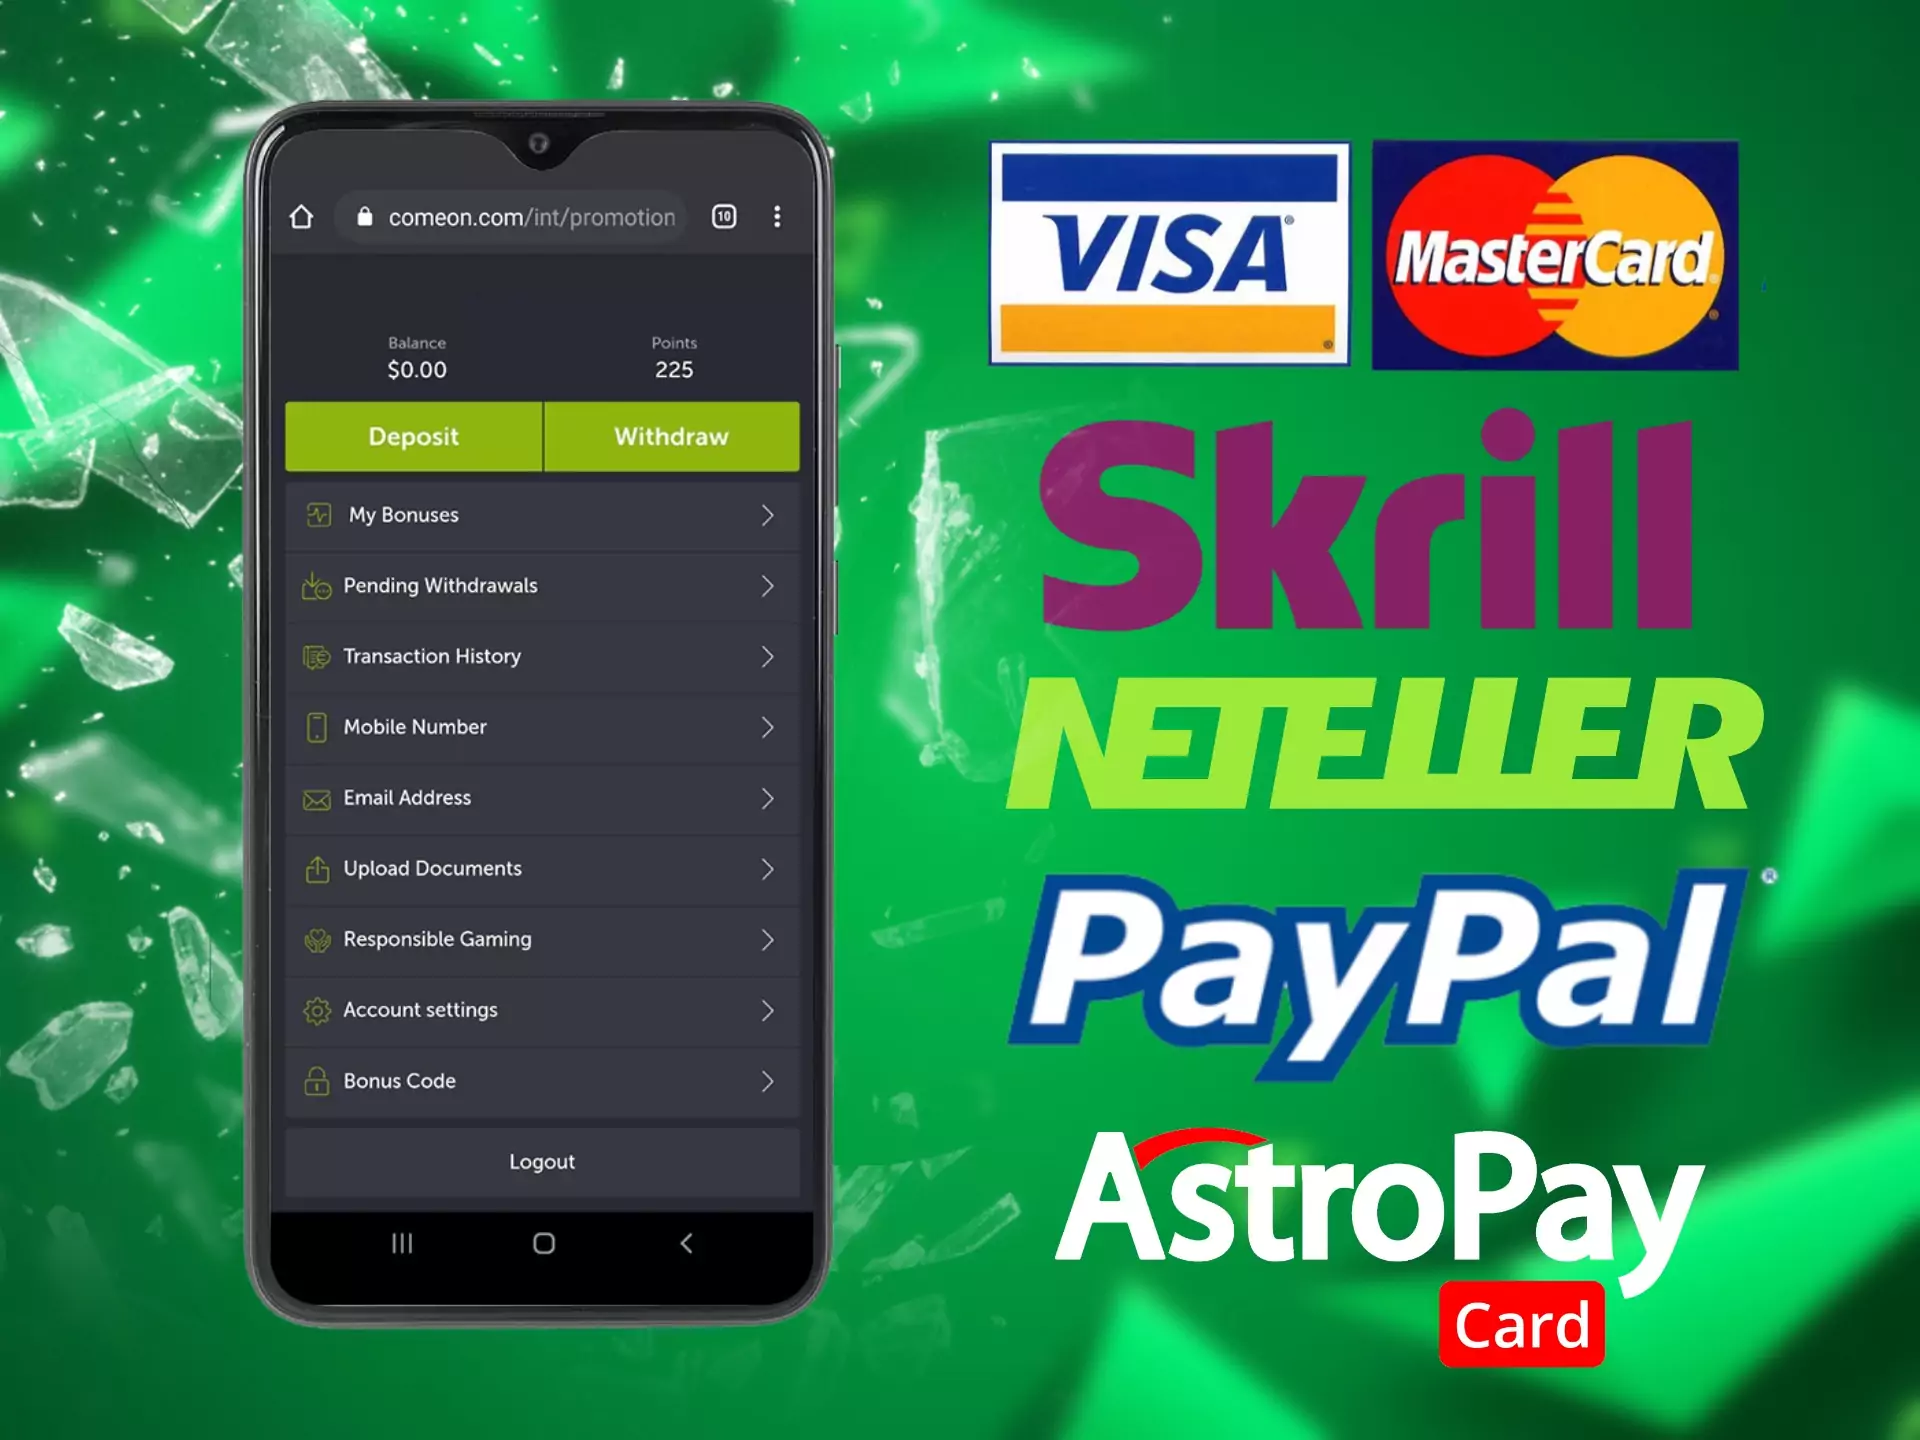 There are a lot of payment methods at ComeOn, that are convenient for Indian players.